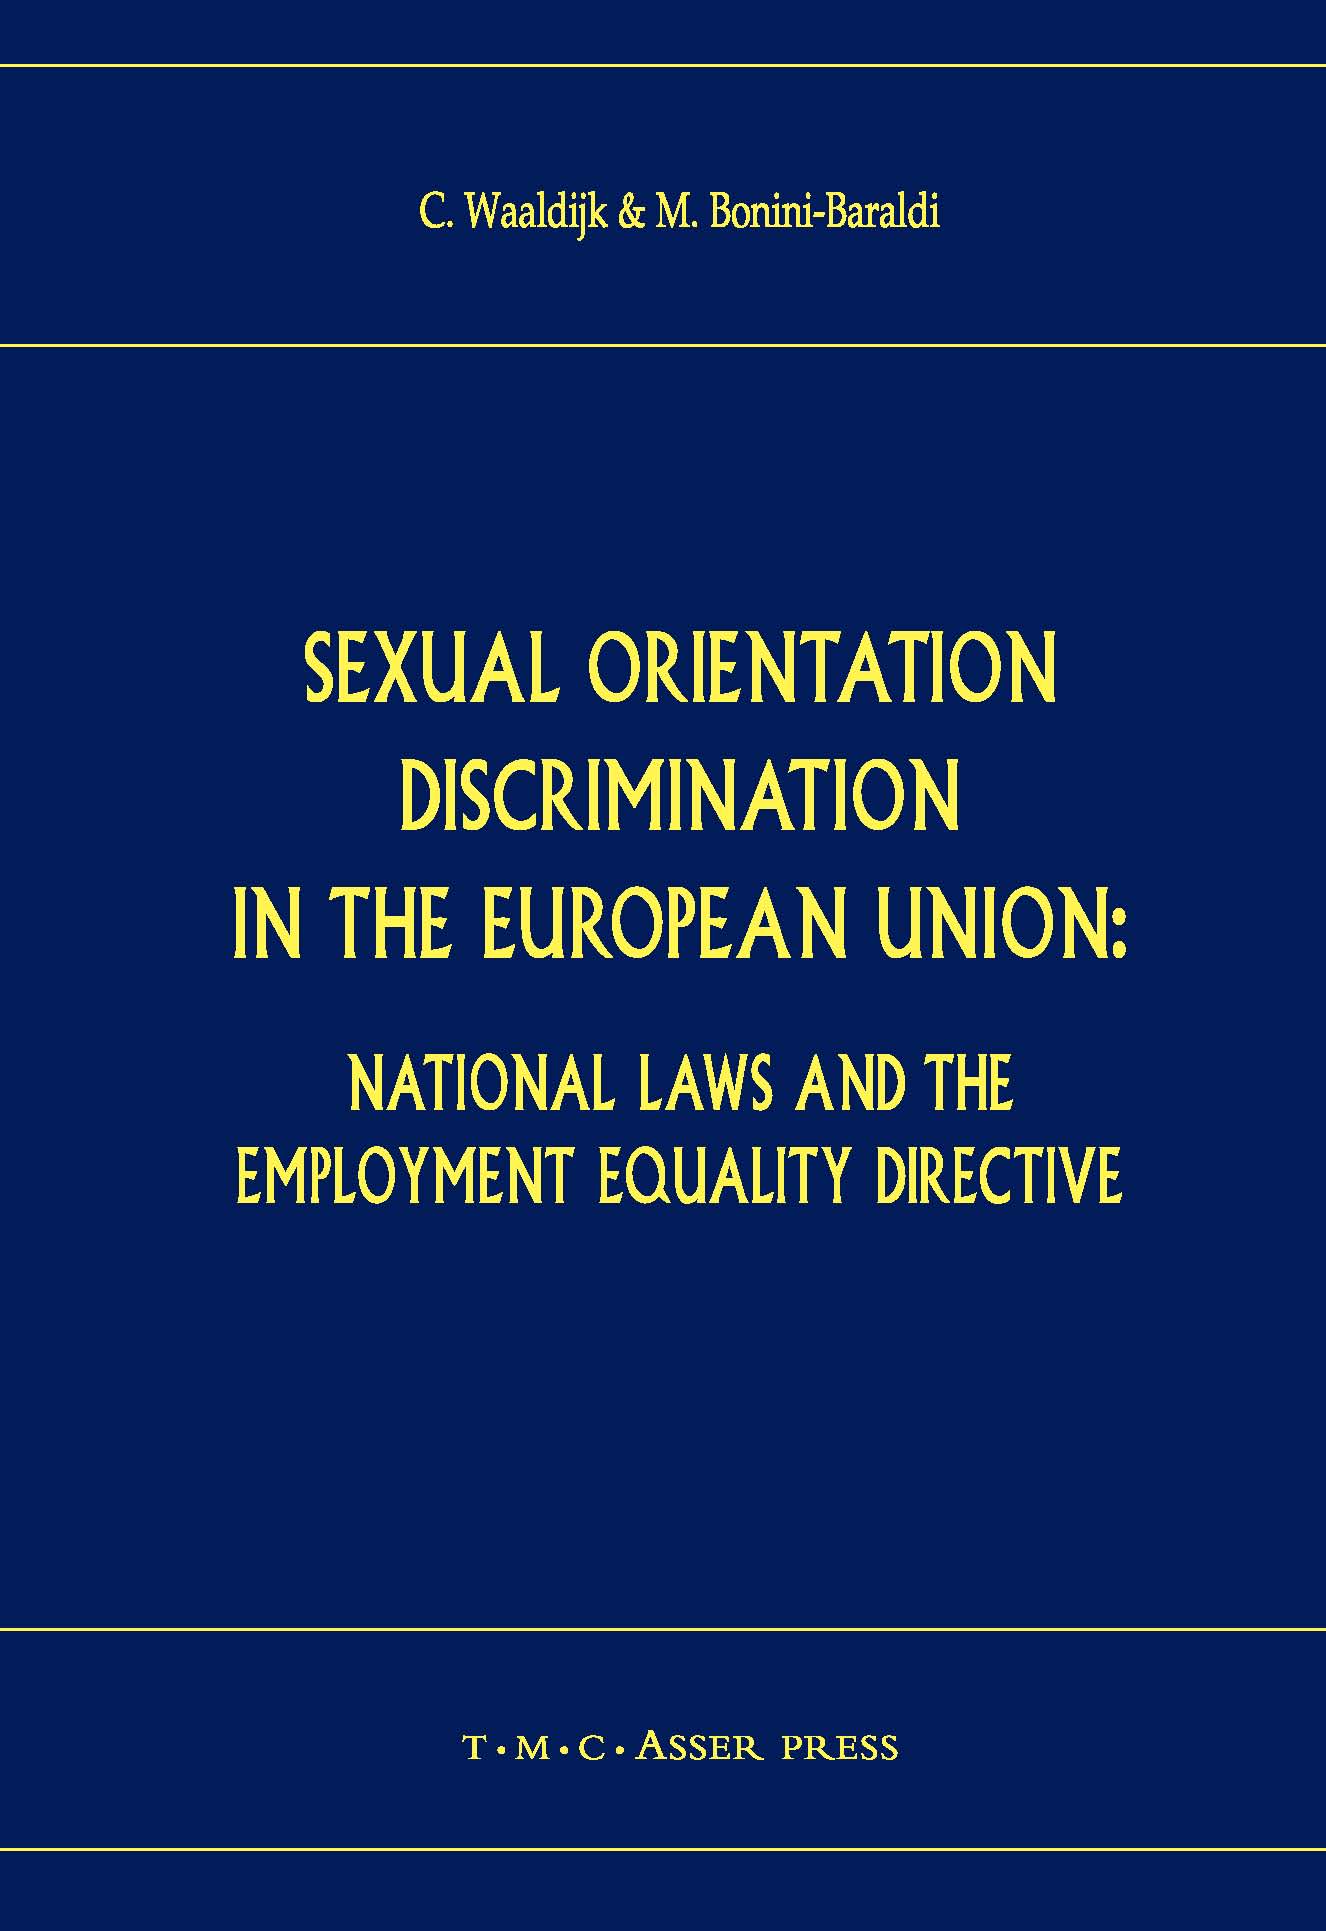 Sexual Orientation Discrimination in the European Union - National Laws and the Employment Equality Directive